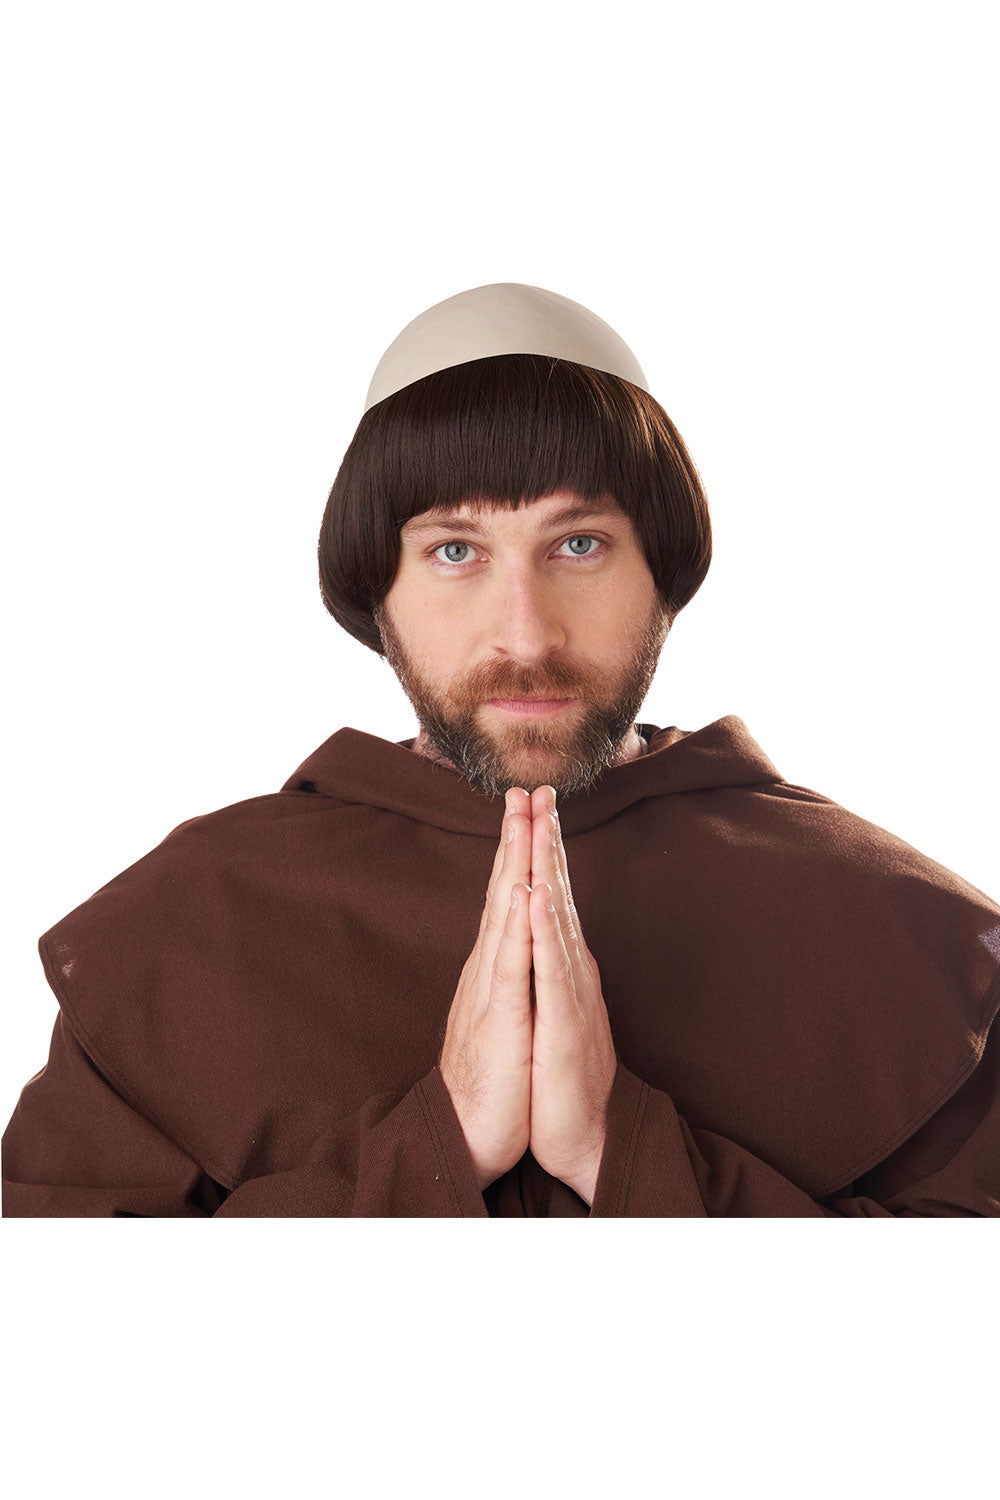 Medieval Friar Wig With Bald Cap California Costume 7120/102